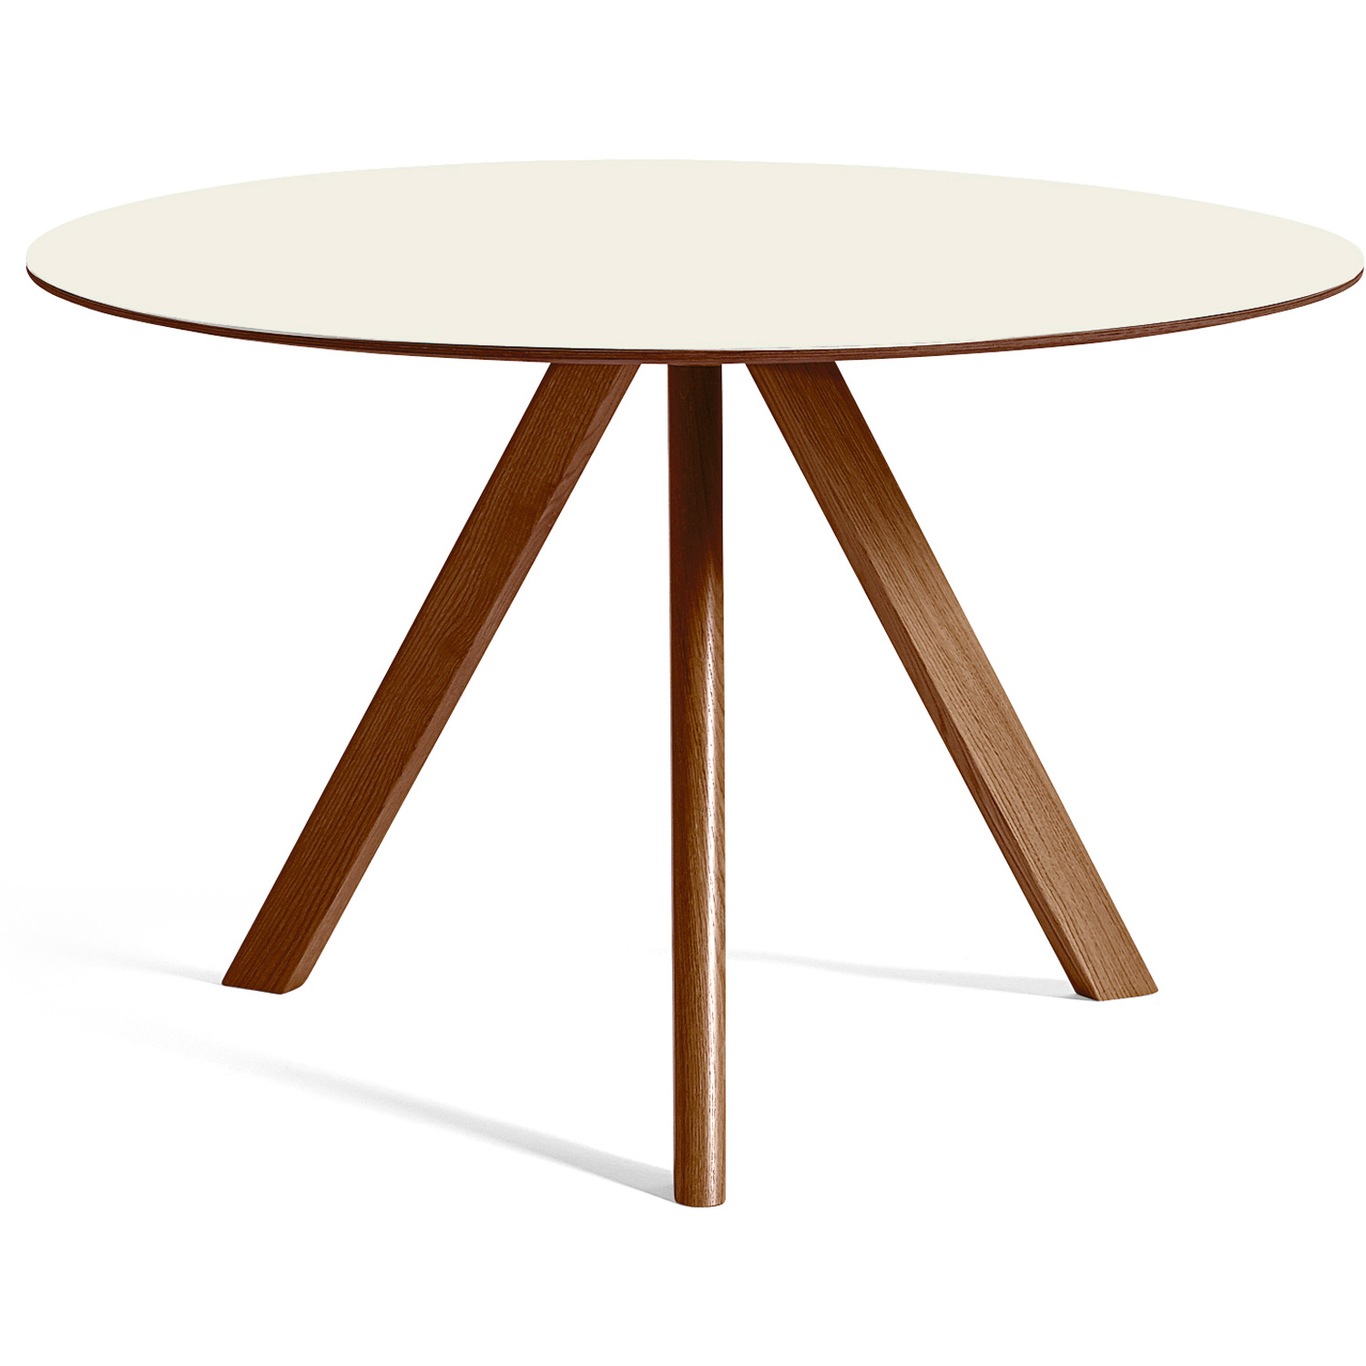 CPH 20 Table Ø120x74 cm, Water based lacquered Walnut / Off-white Linoleum